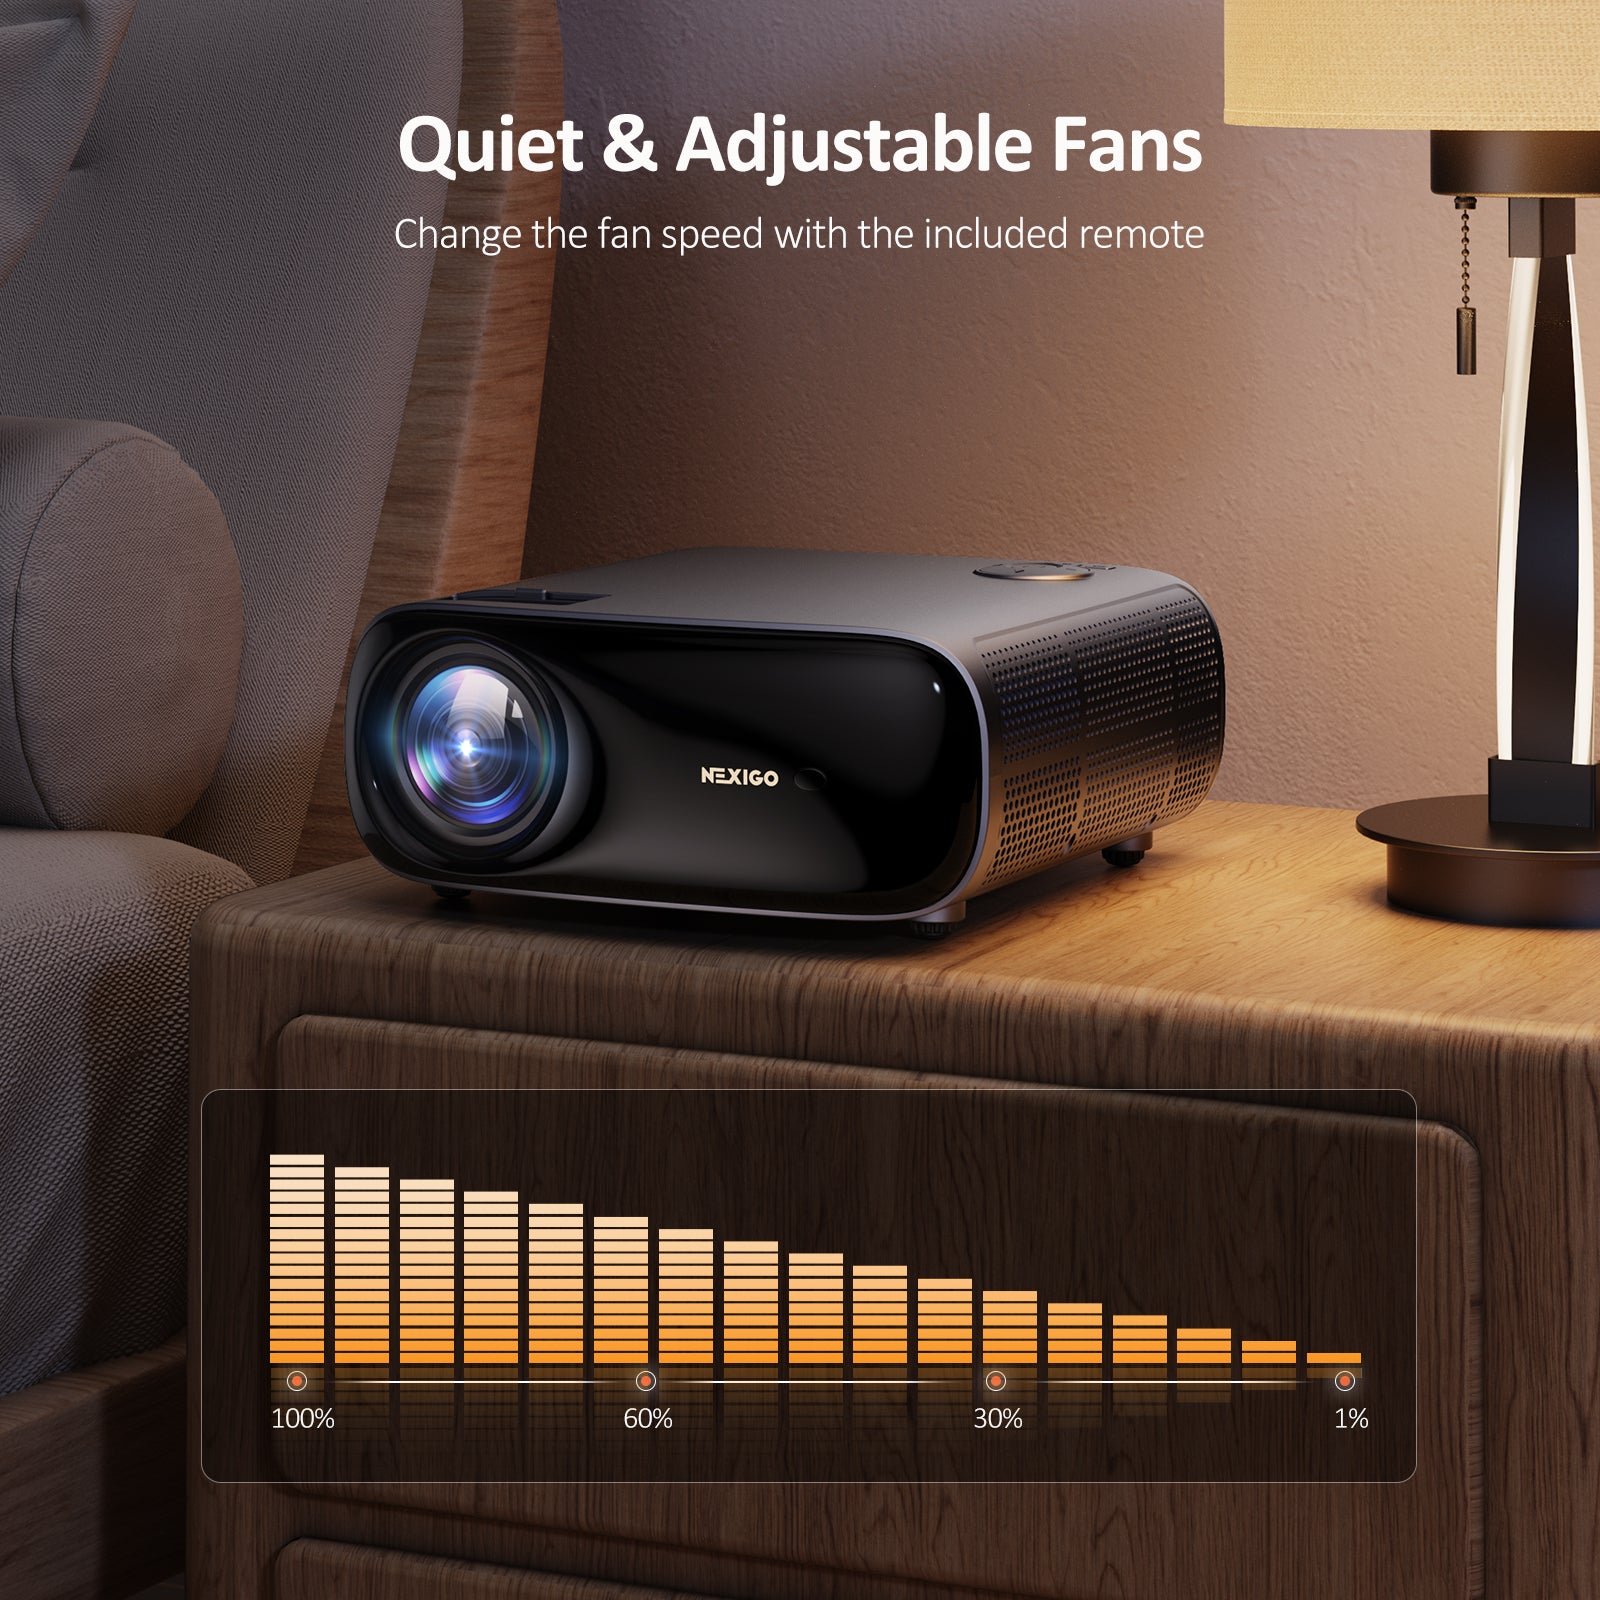 Bedside projector with quiet fan and adjustable speed via remote control for noise reduction.